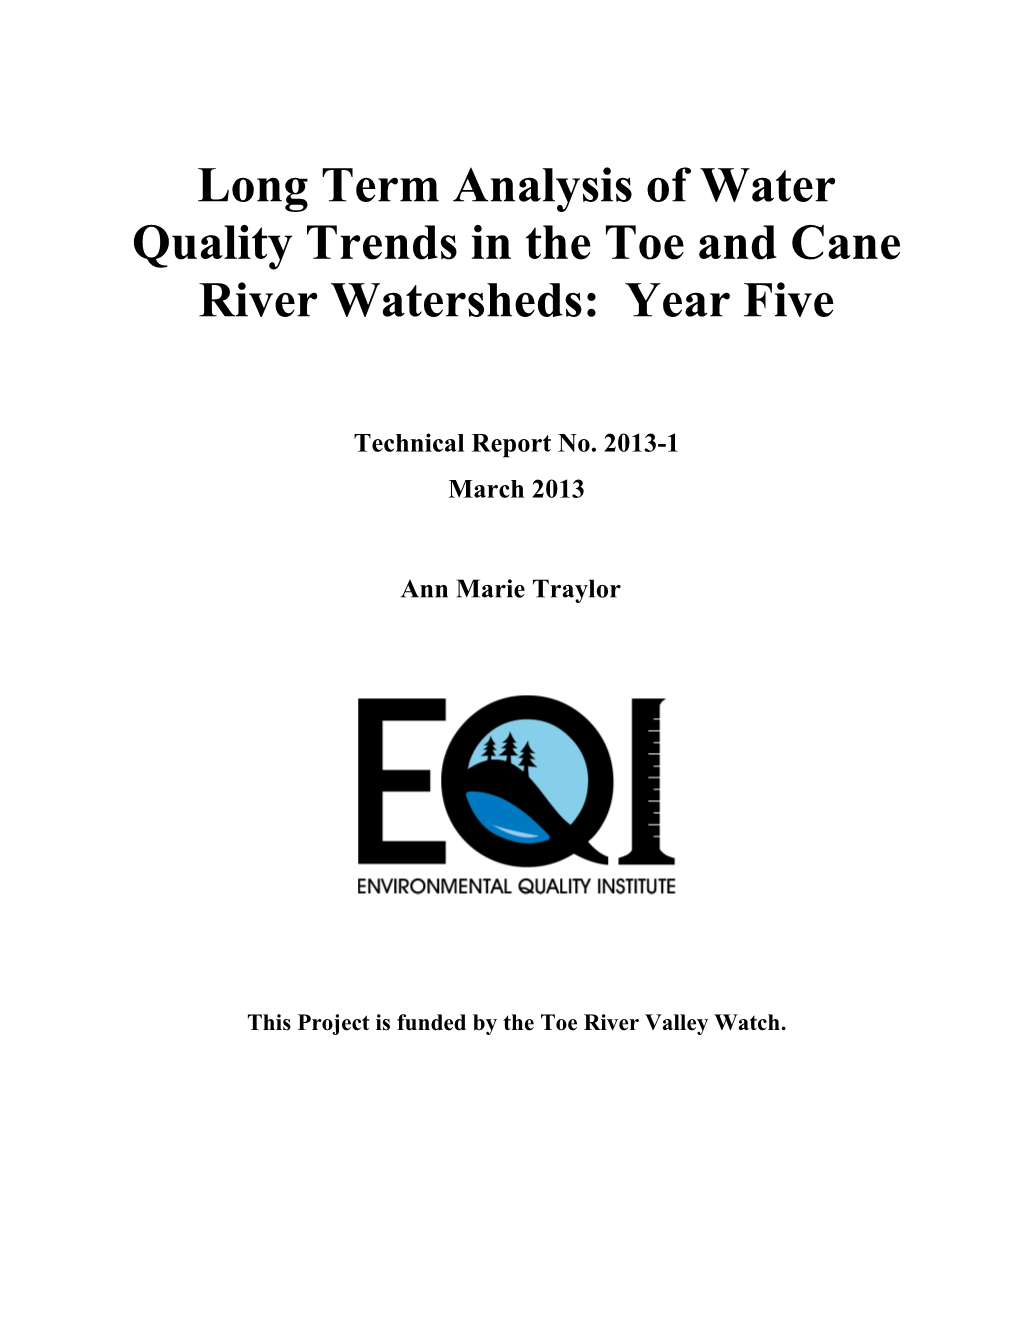 Long Term Analysis of Water Quality Trends in the Toe and Cane River Watersheds: Year Five